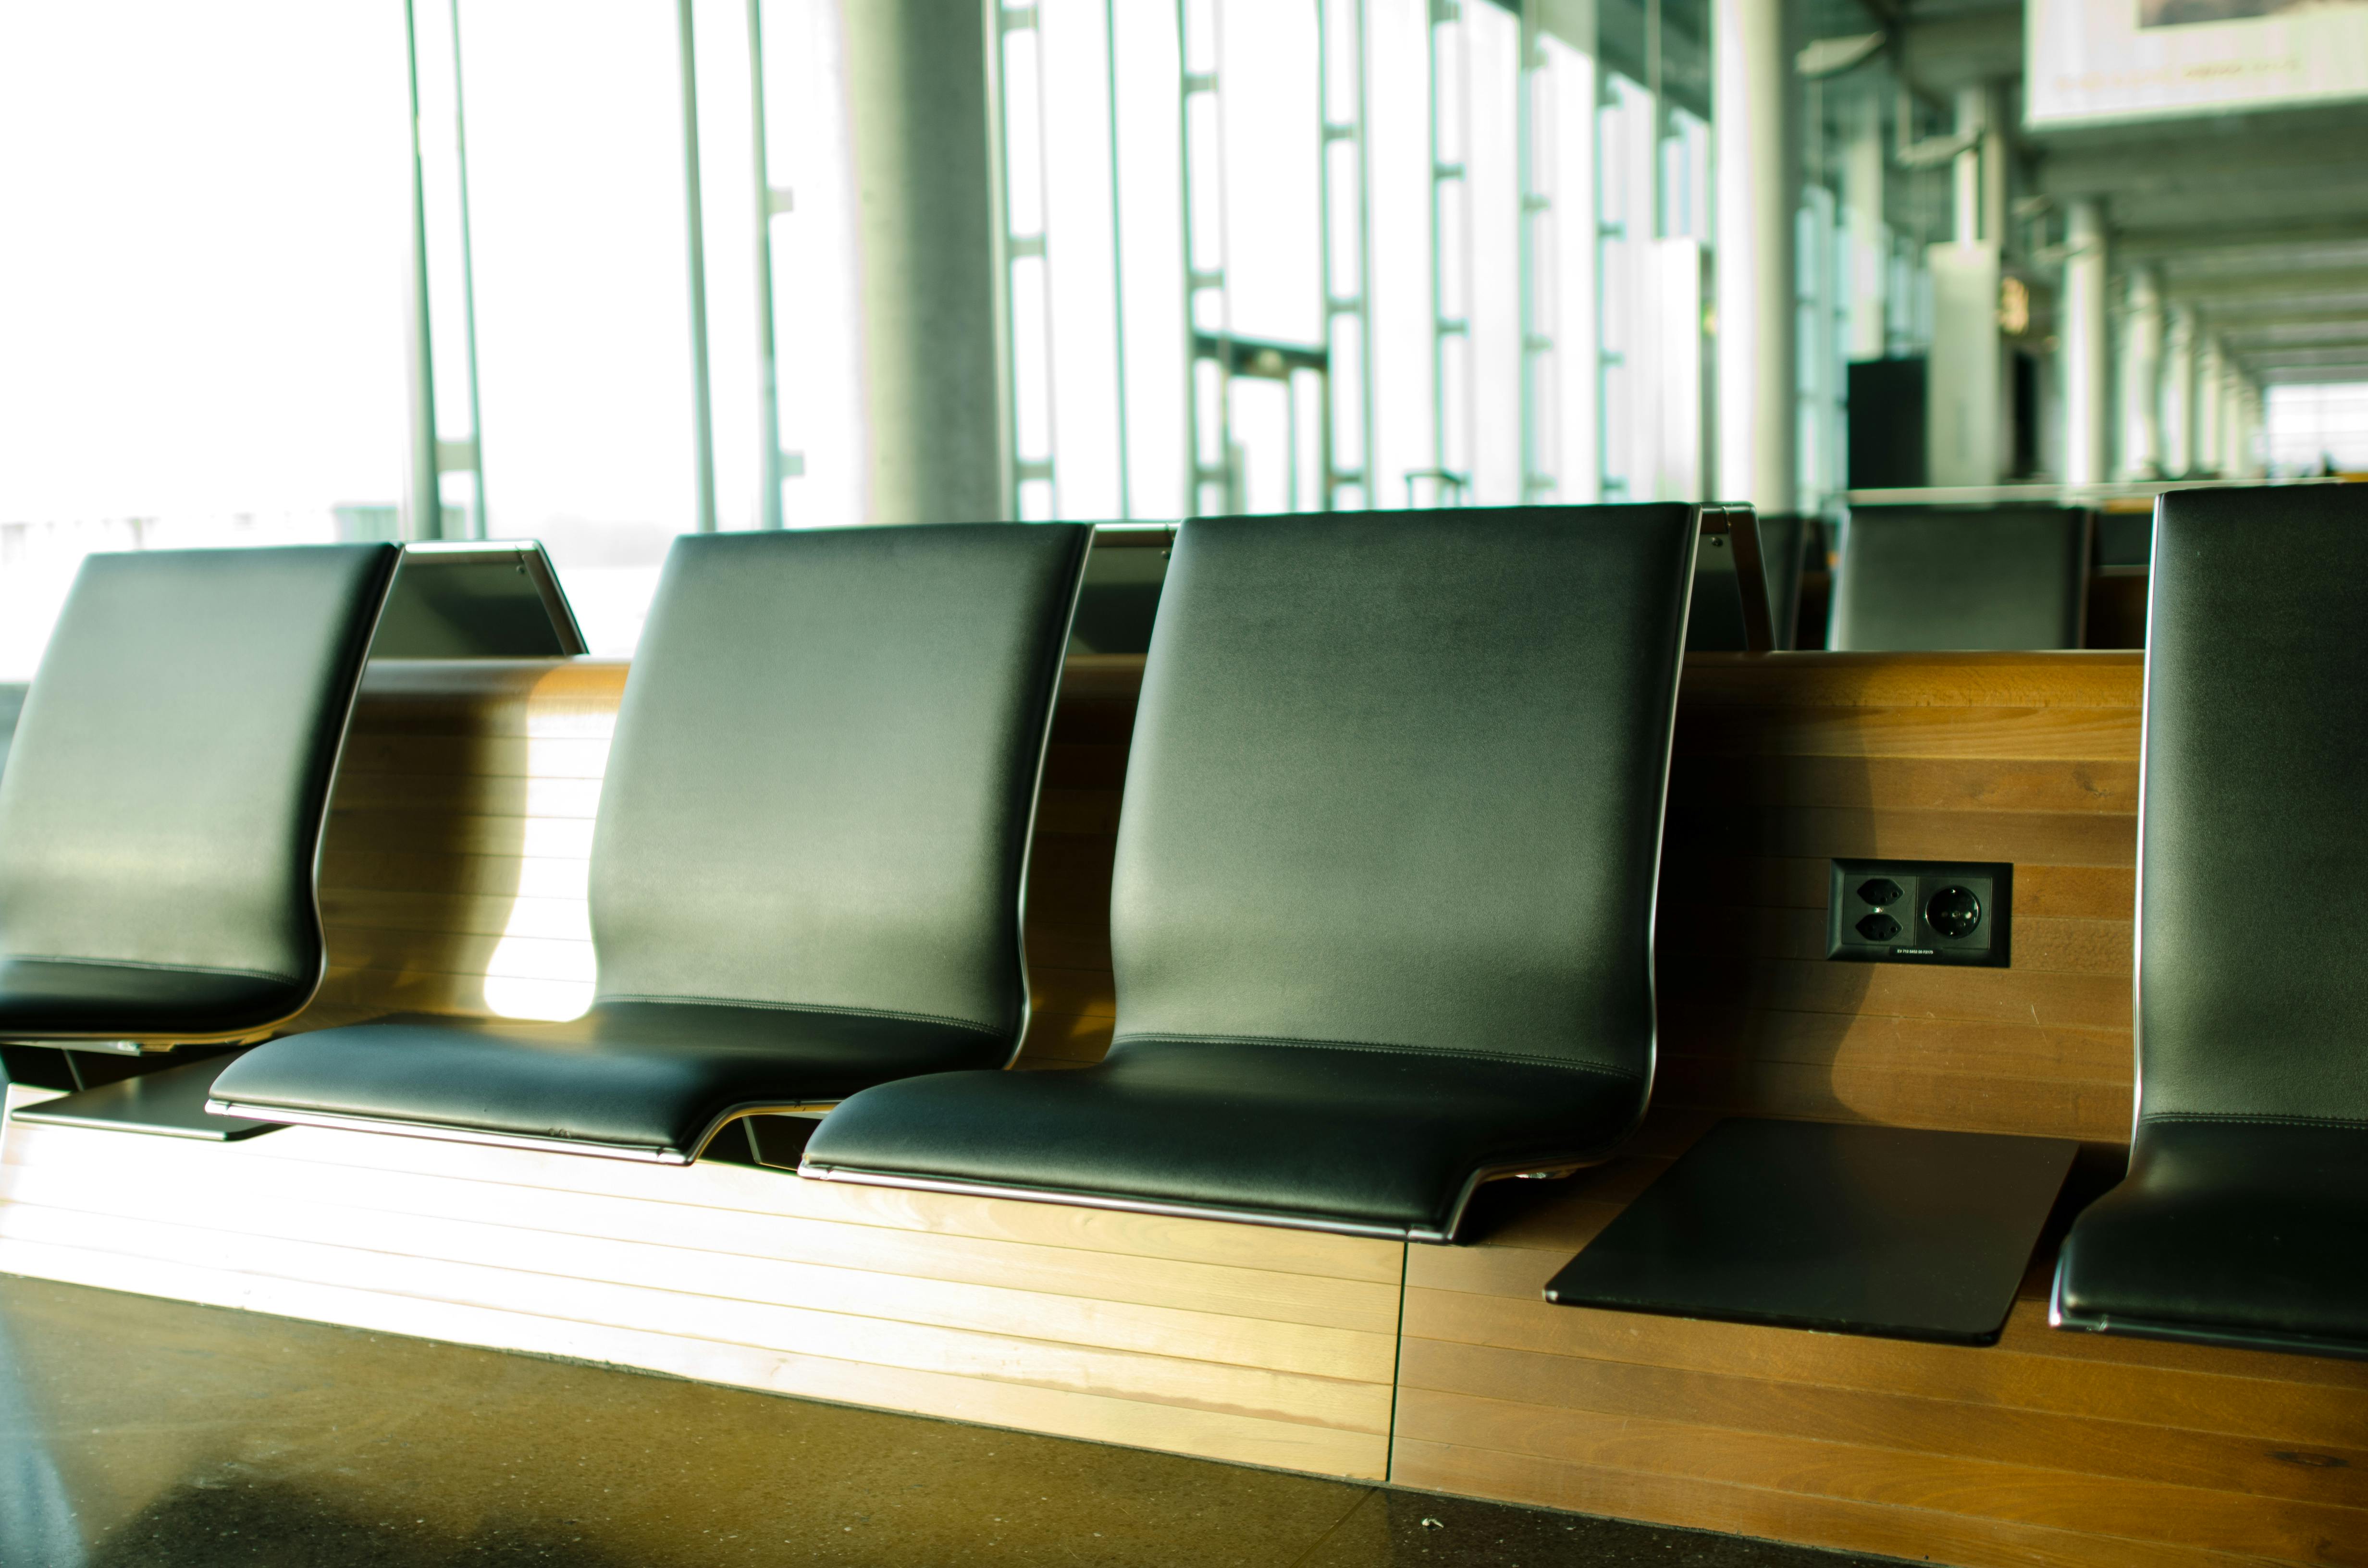 Airport benches | Source: Pexels